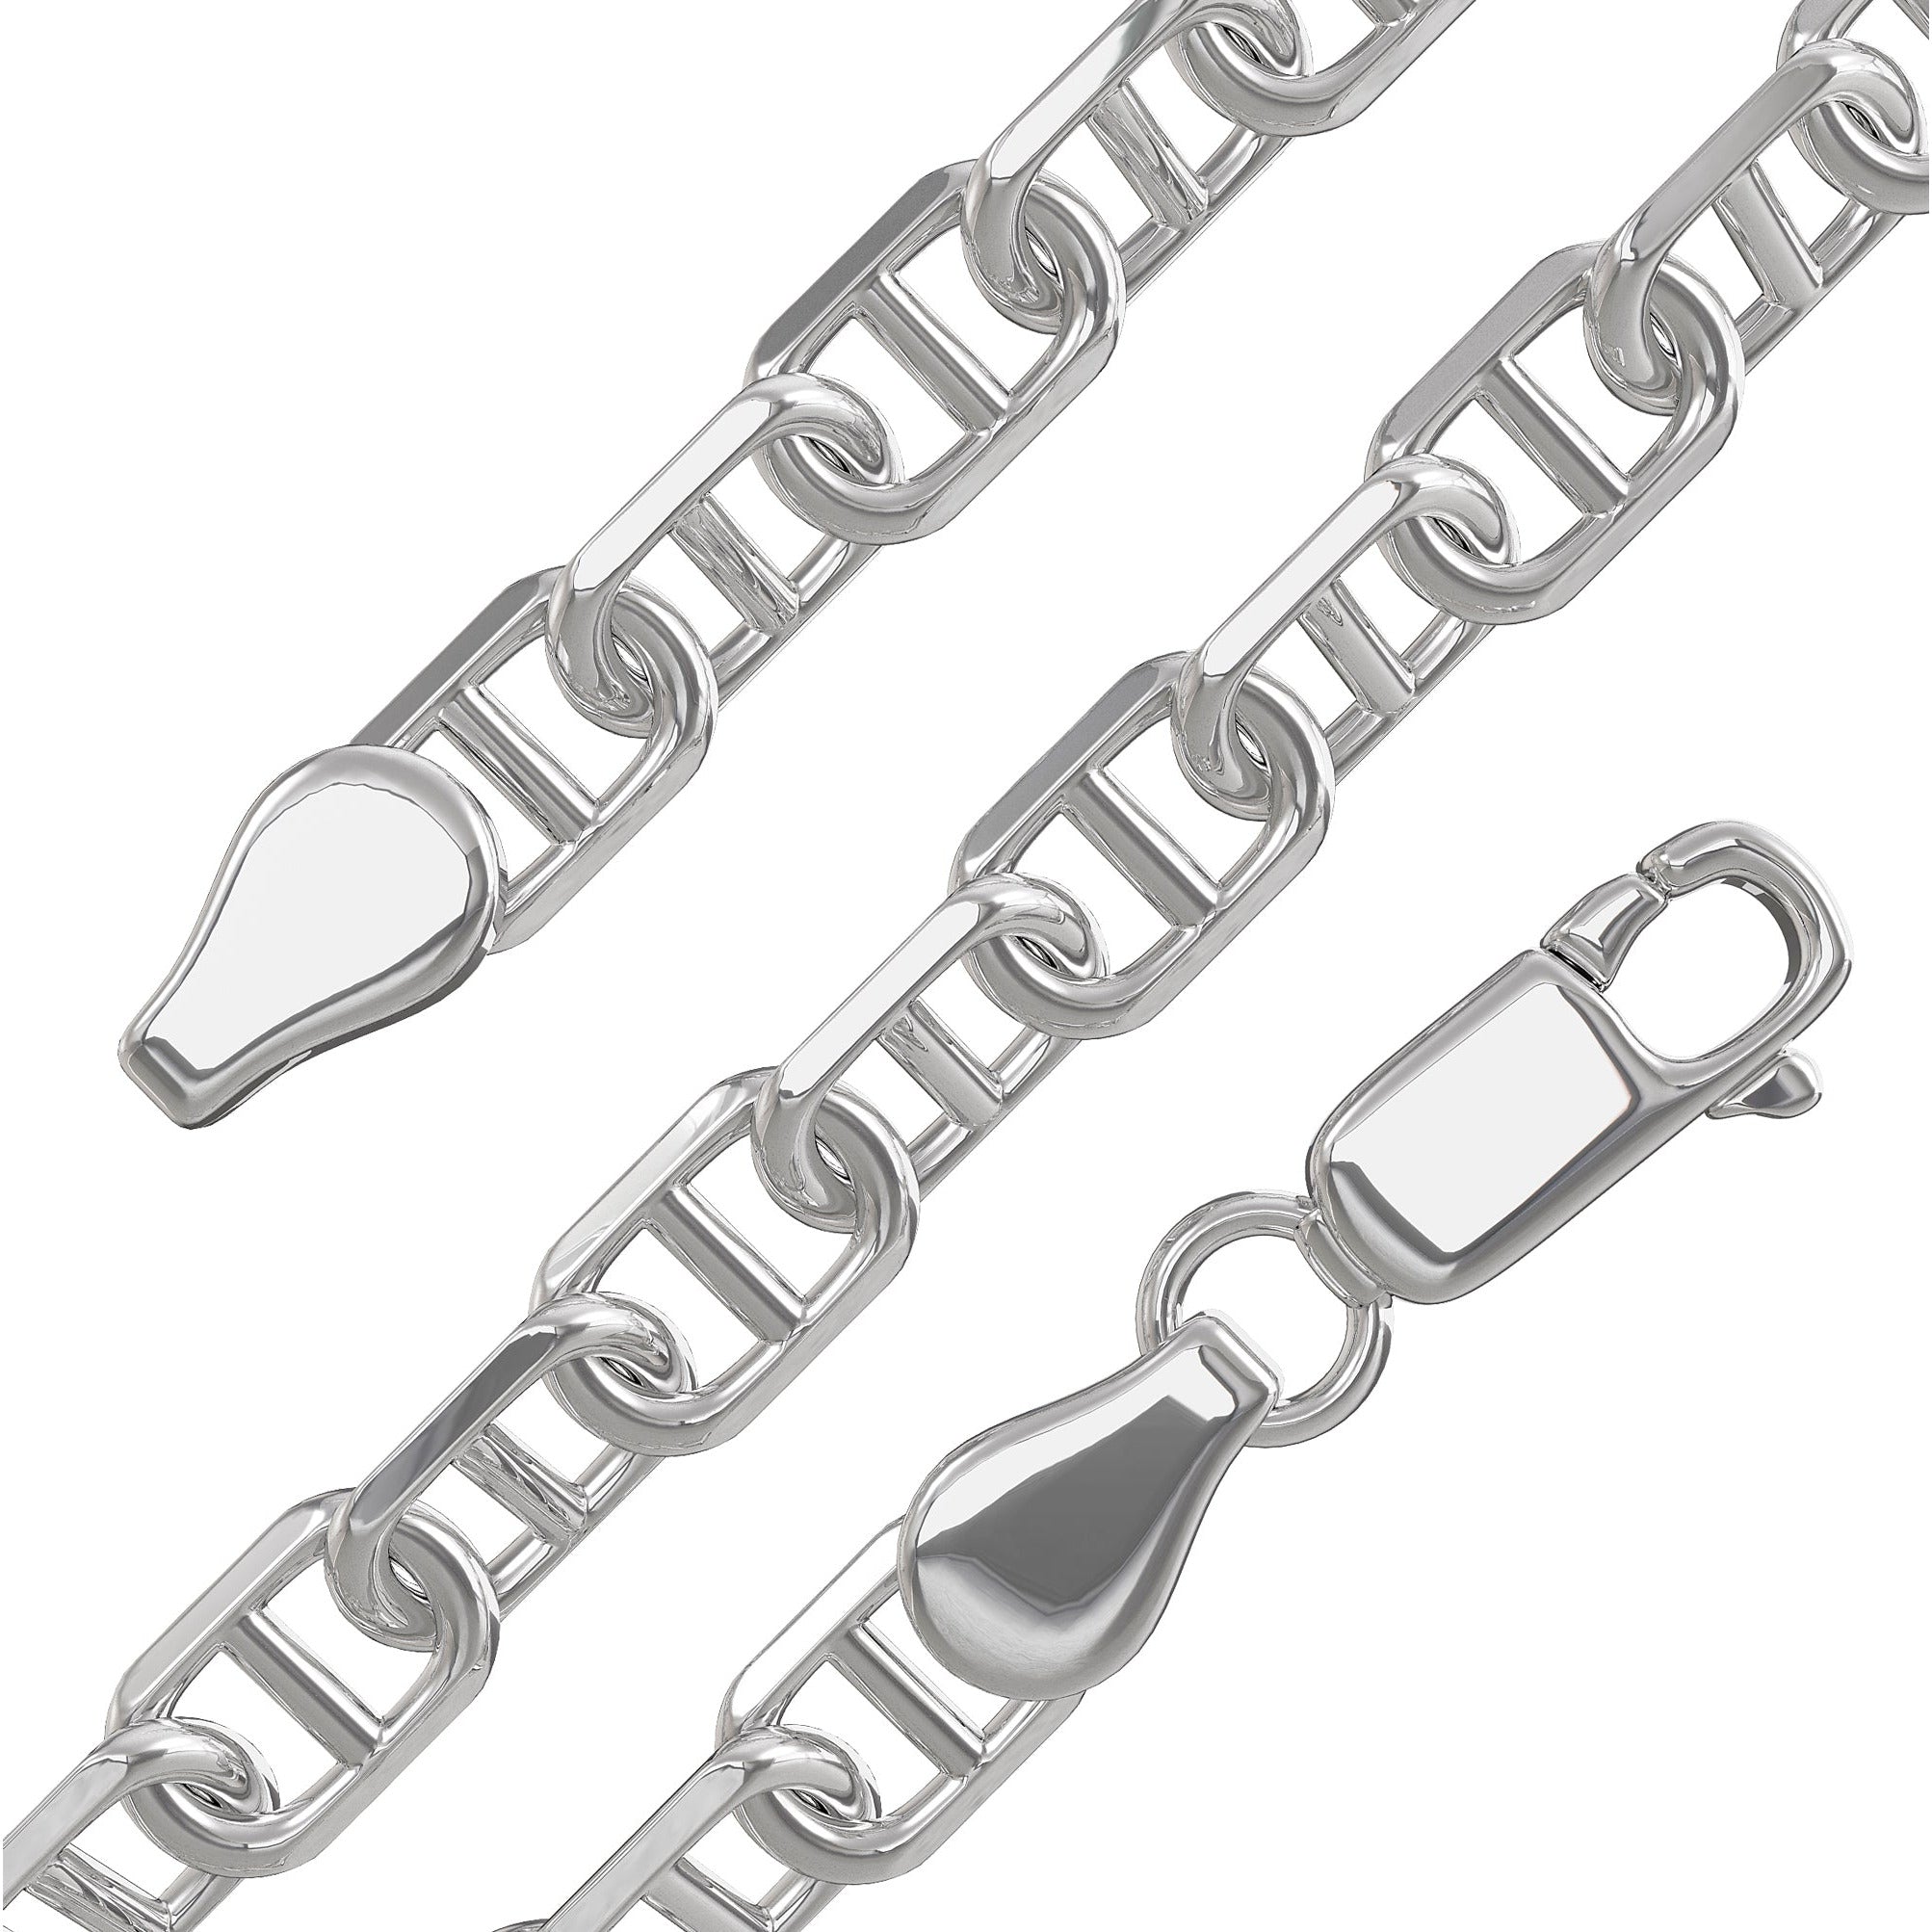 Sterling Silver Mariner Link Chain - Silver Chains | Lirys Jewelry 6mm / 30